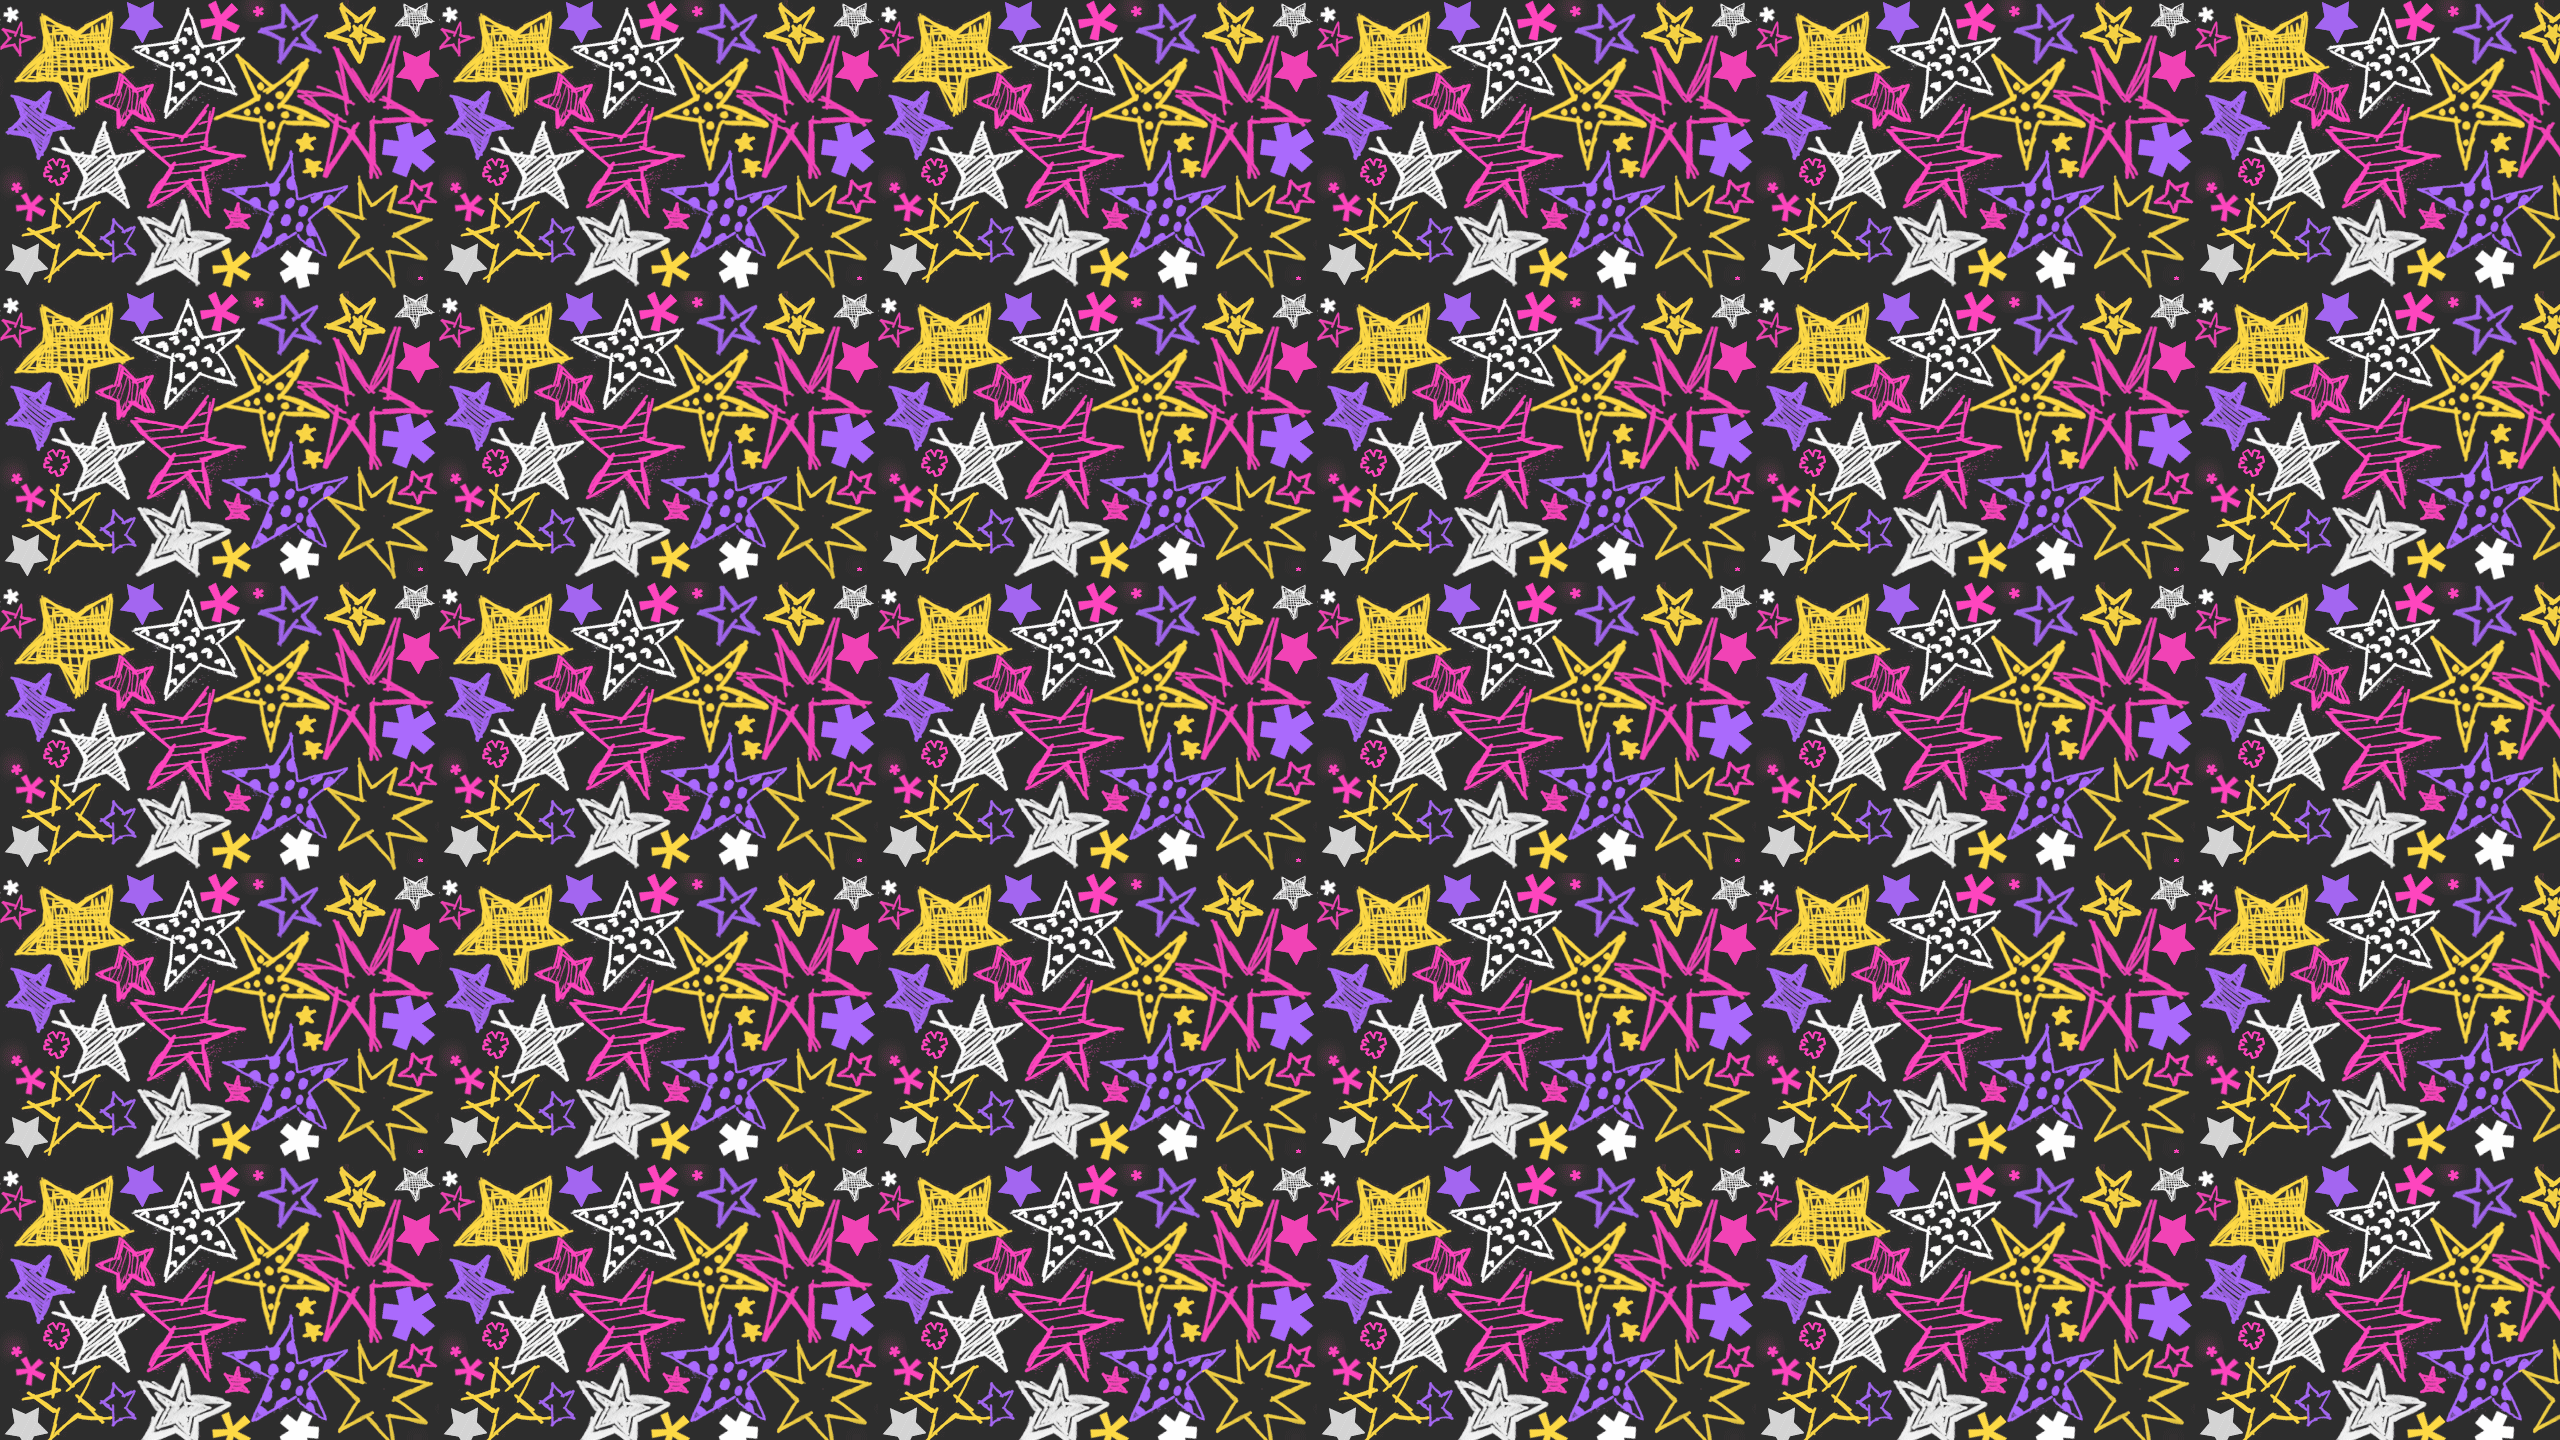 This Crayon Stars Desktop Wallpaper Is Easy Just Save The